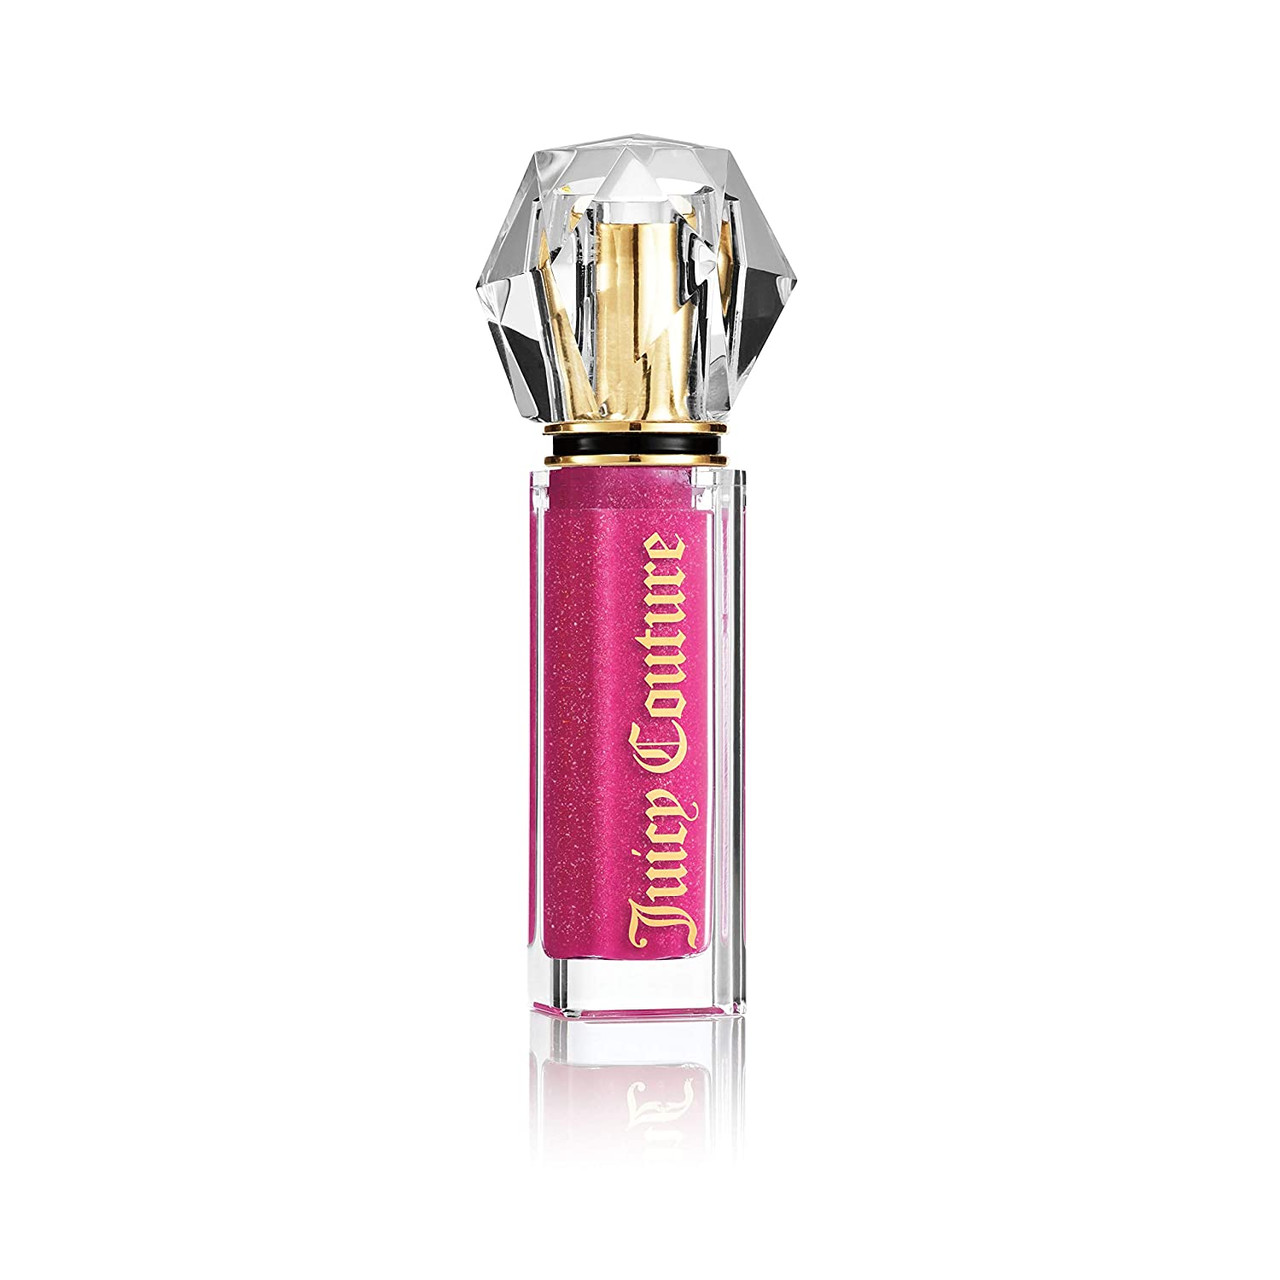 Juicy Couture is Launching a Makeup Line - Juicy Couture New Lipstick,  Eyeshadow, Lip Gloss, Eyeliner